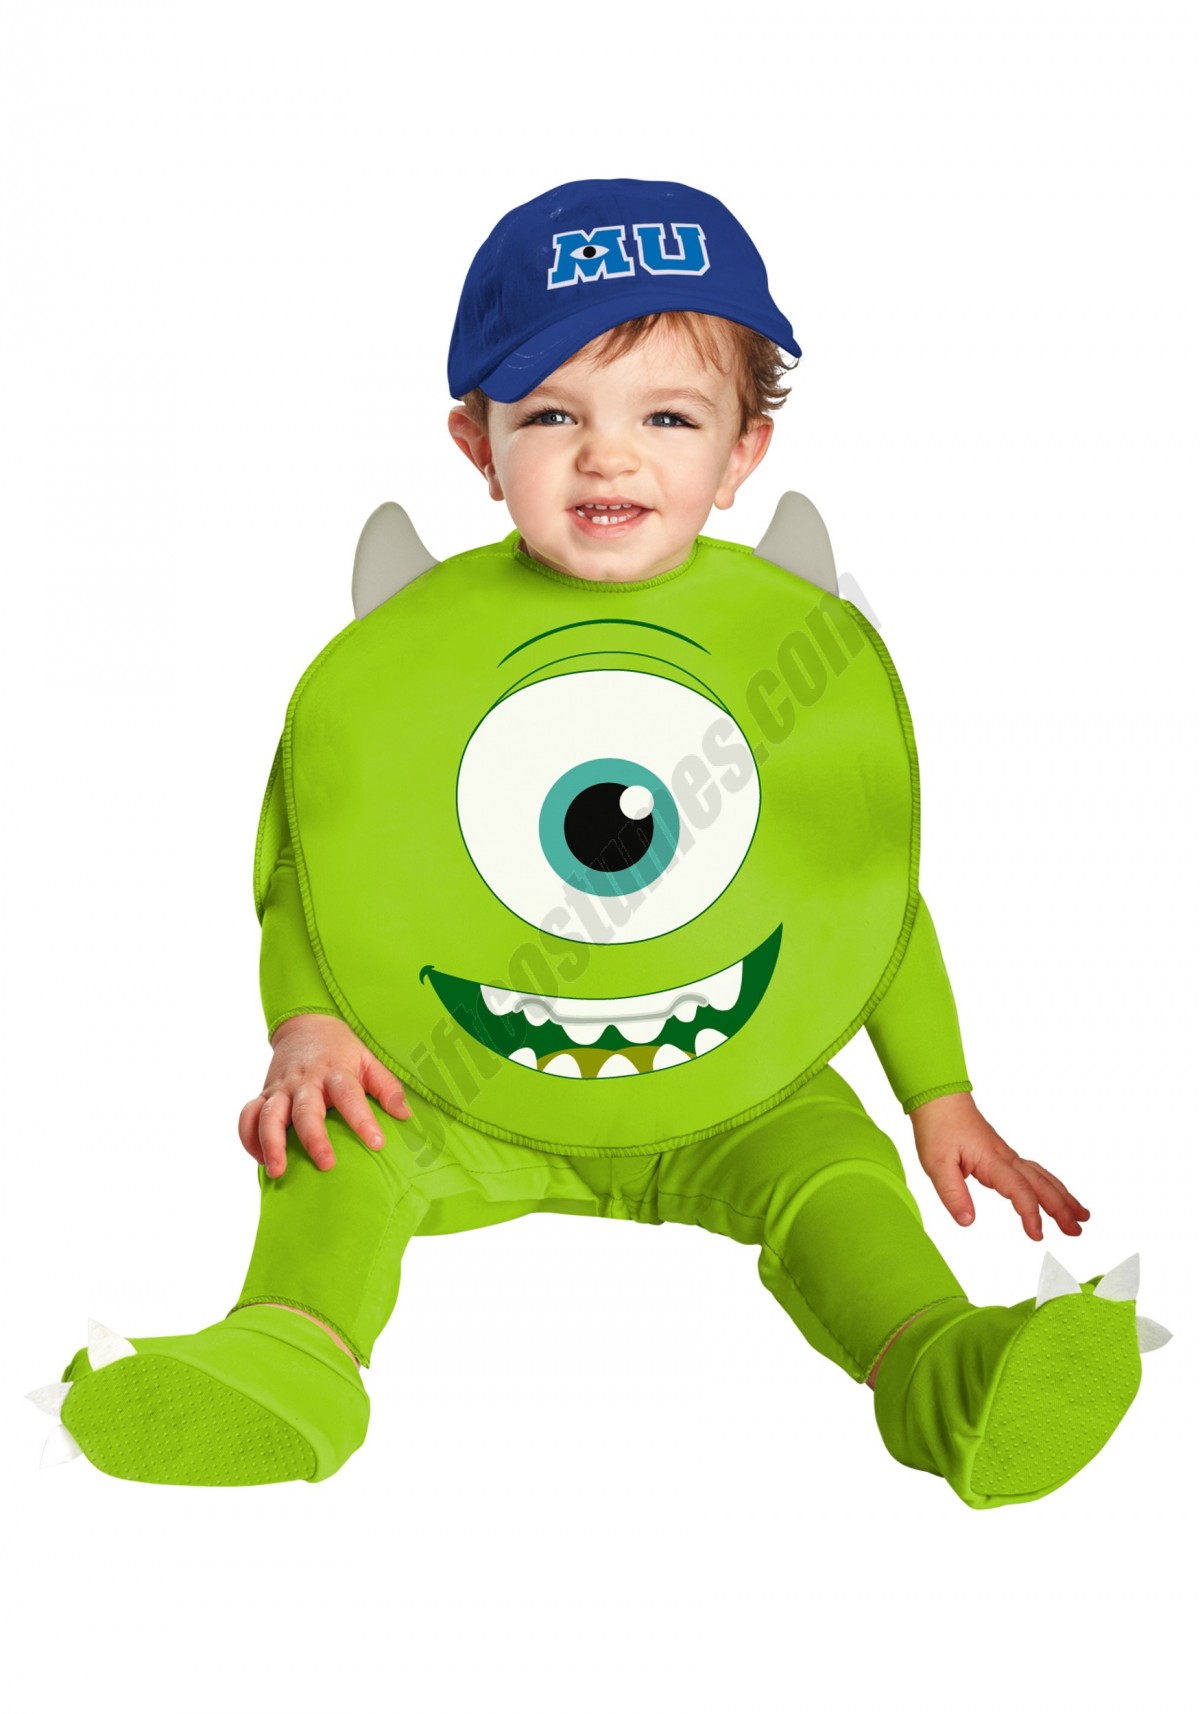 Mike Classic Infant Costume Promotions - -0